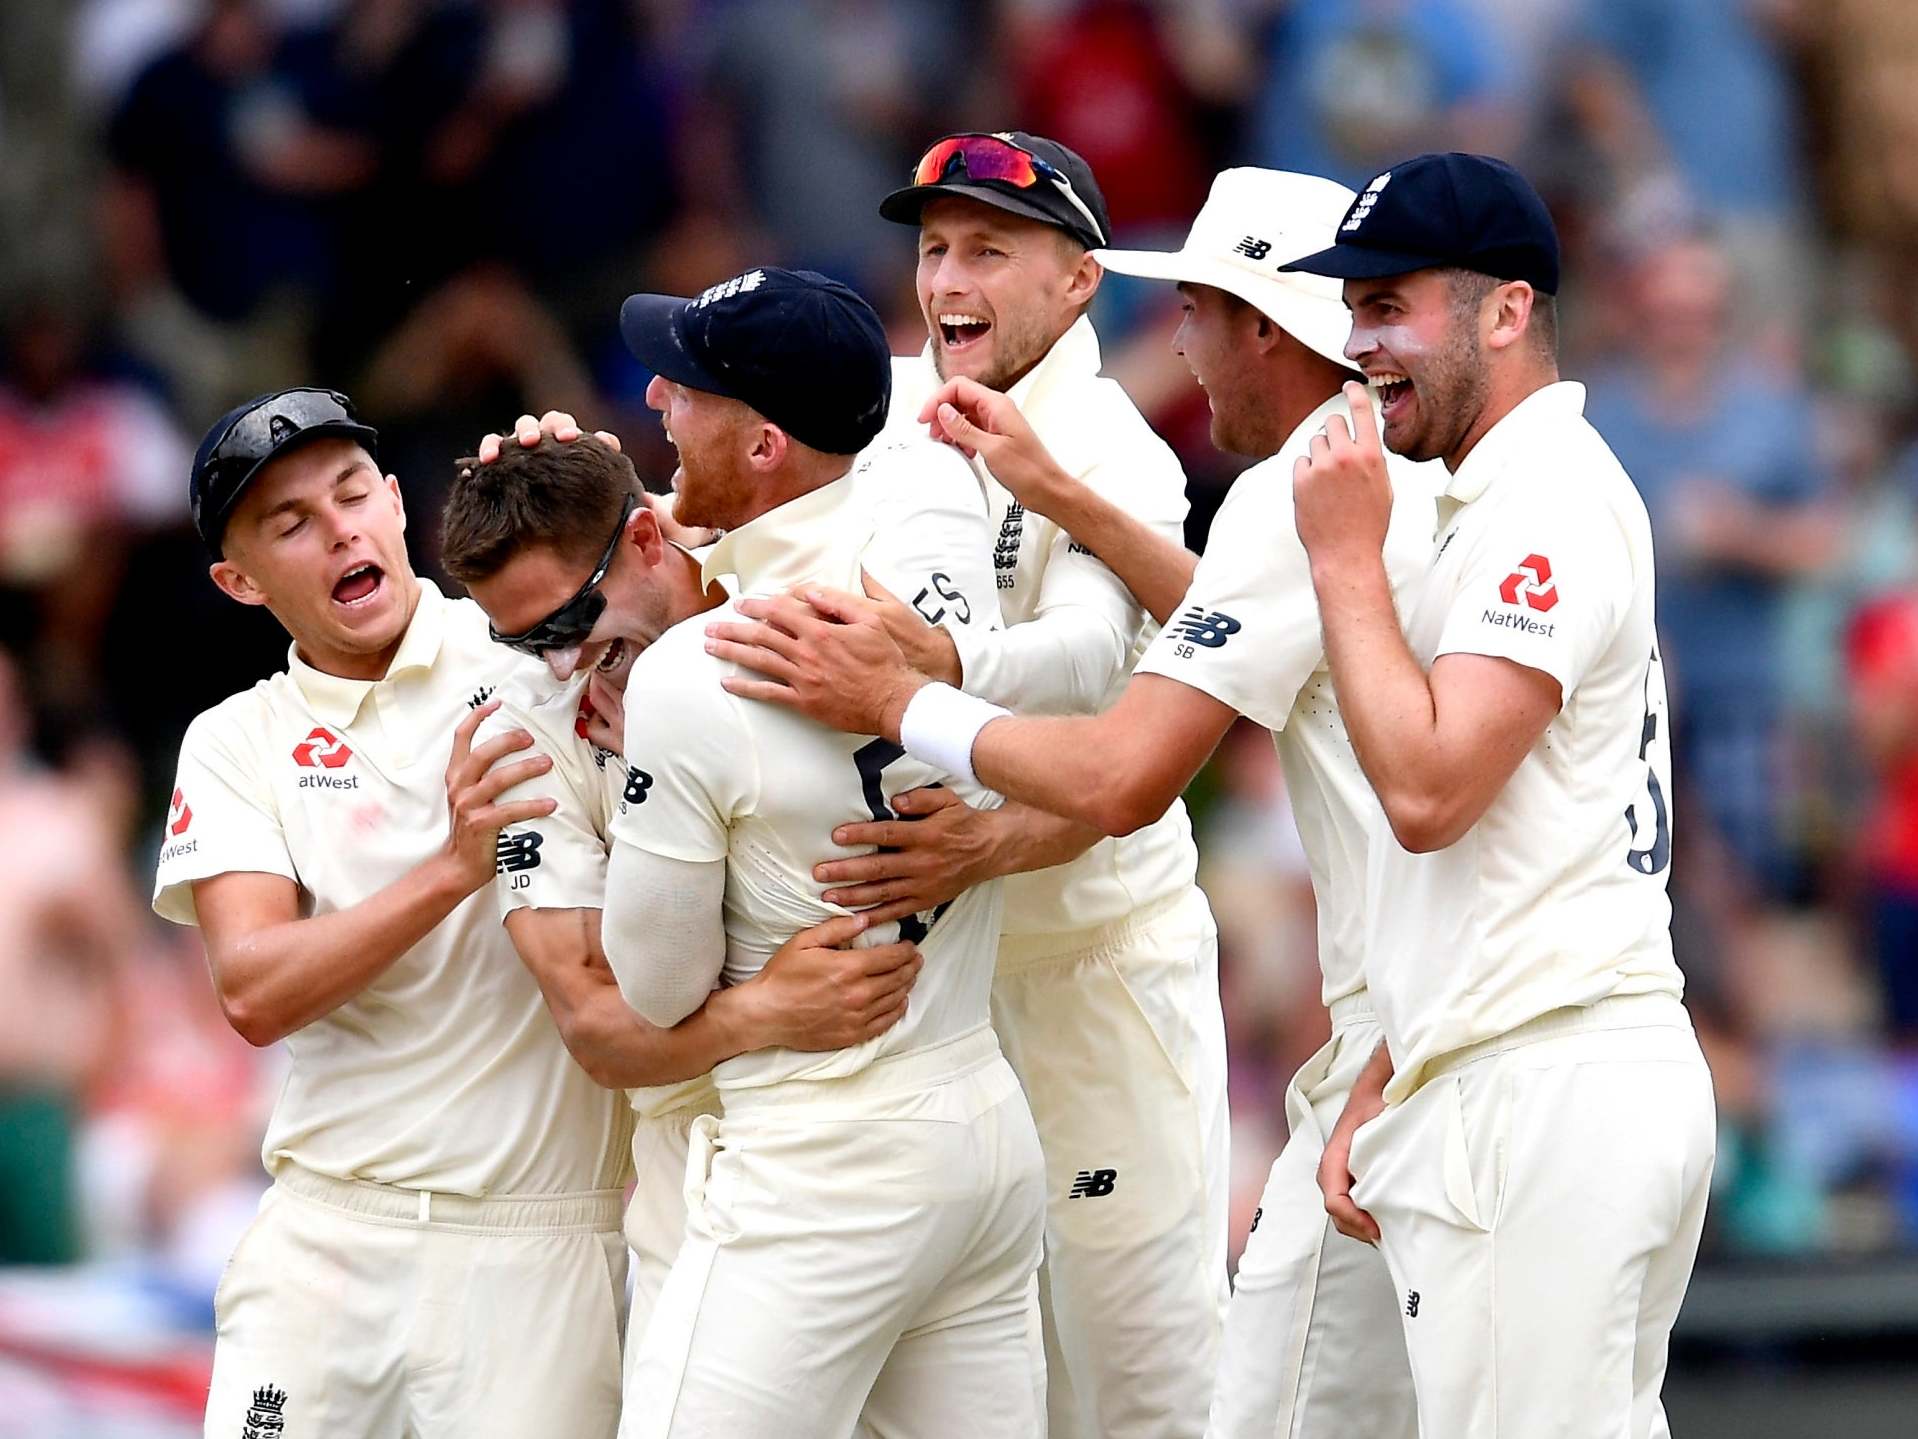 England put themselves into a winning position in Cape Town